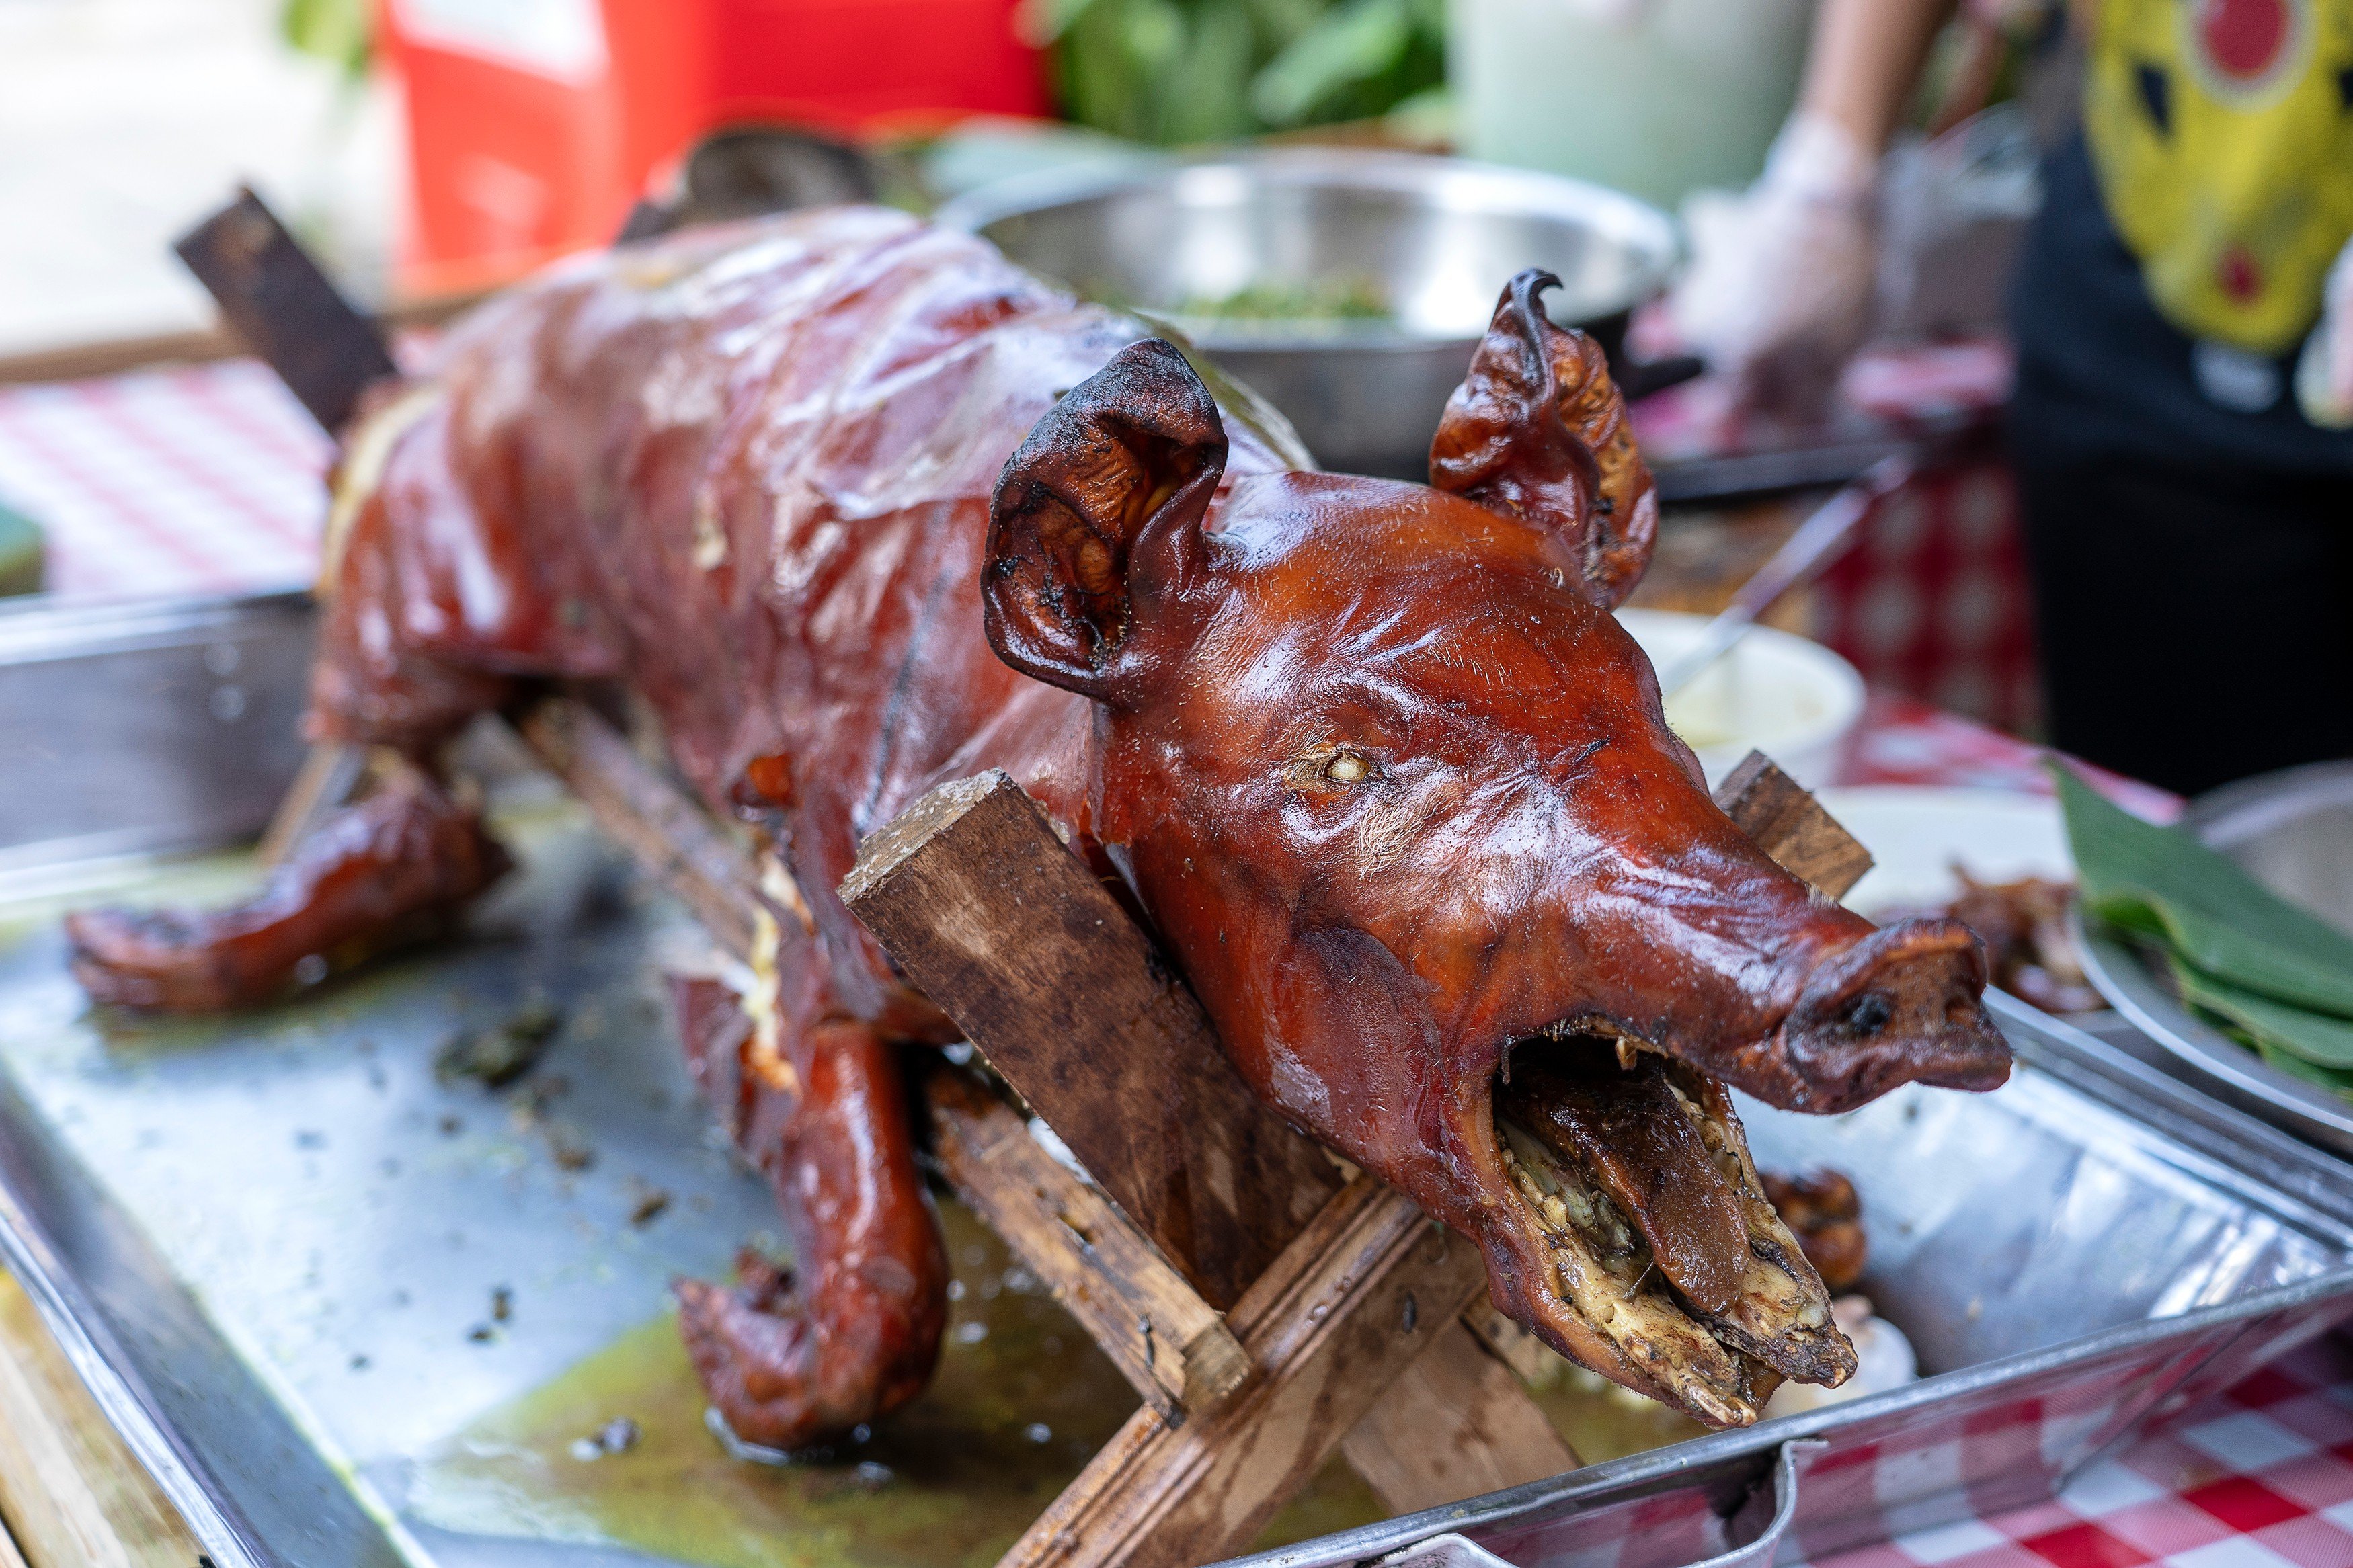 Barbecued roast pig is a traditional dish in Bali, Indonesia. Pork dishes are surprisingly on the rise in the mostly Muslim populated country. Photo: Shutterstock